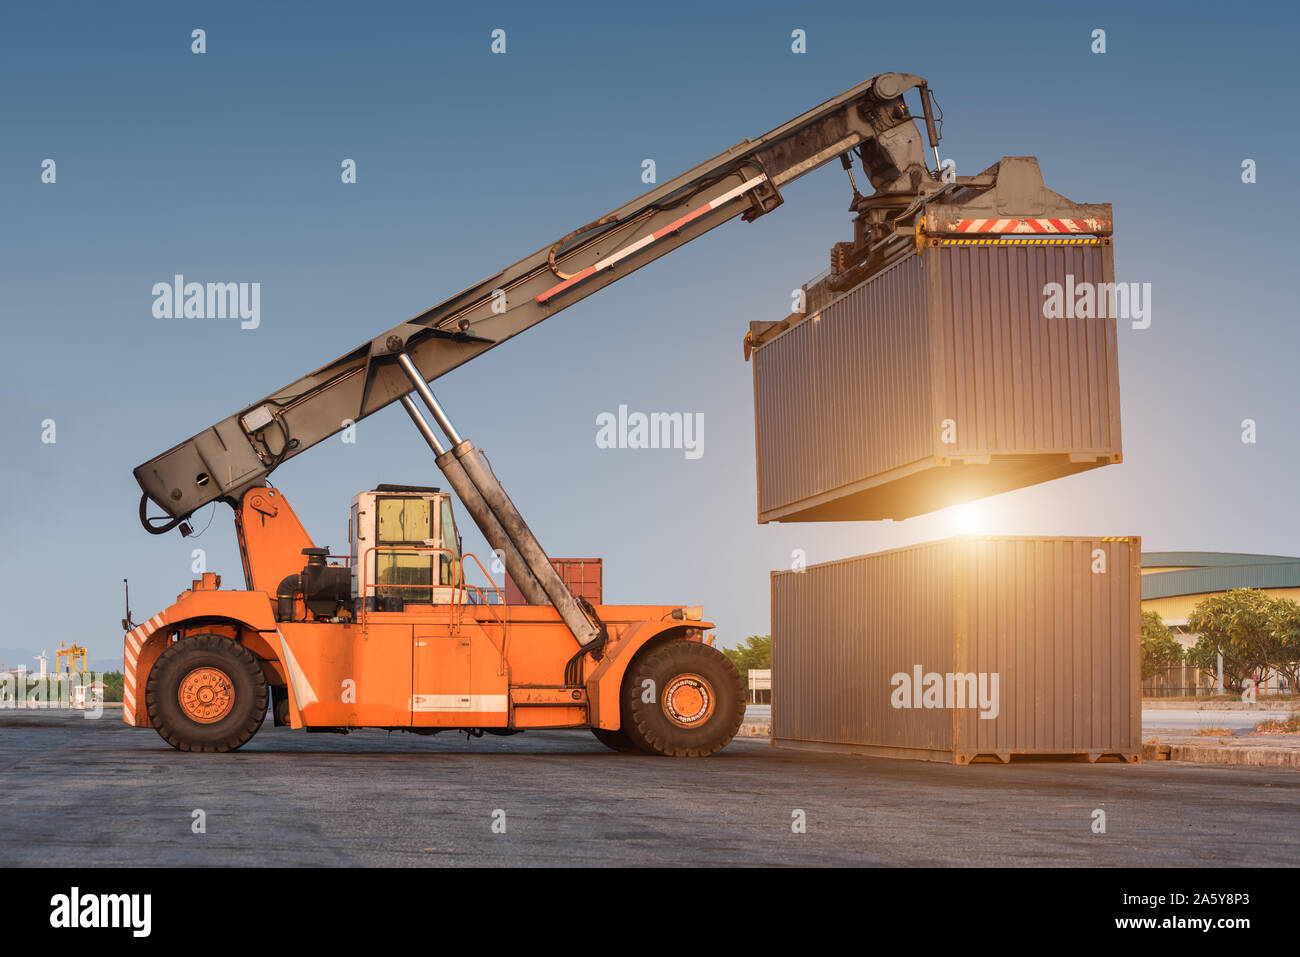 Forklift Handling Holding Container Box At Harbor Logistic Zone Stock Photo Alamy